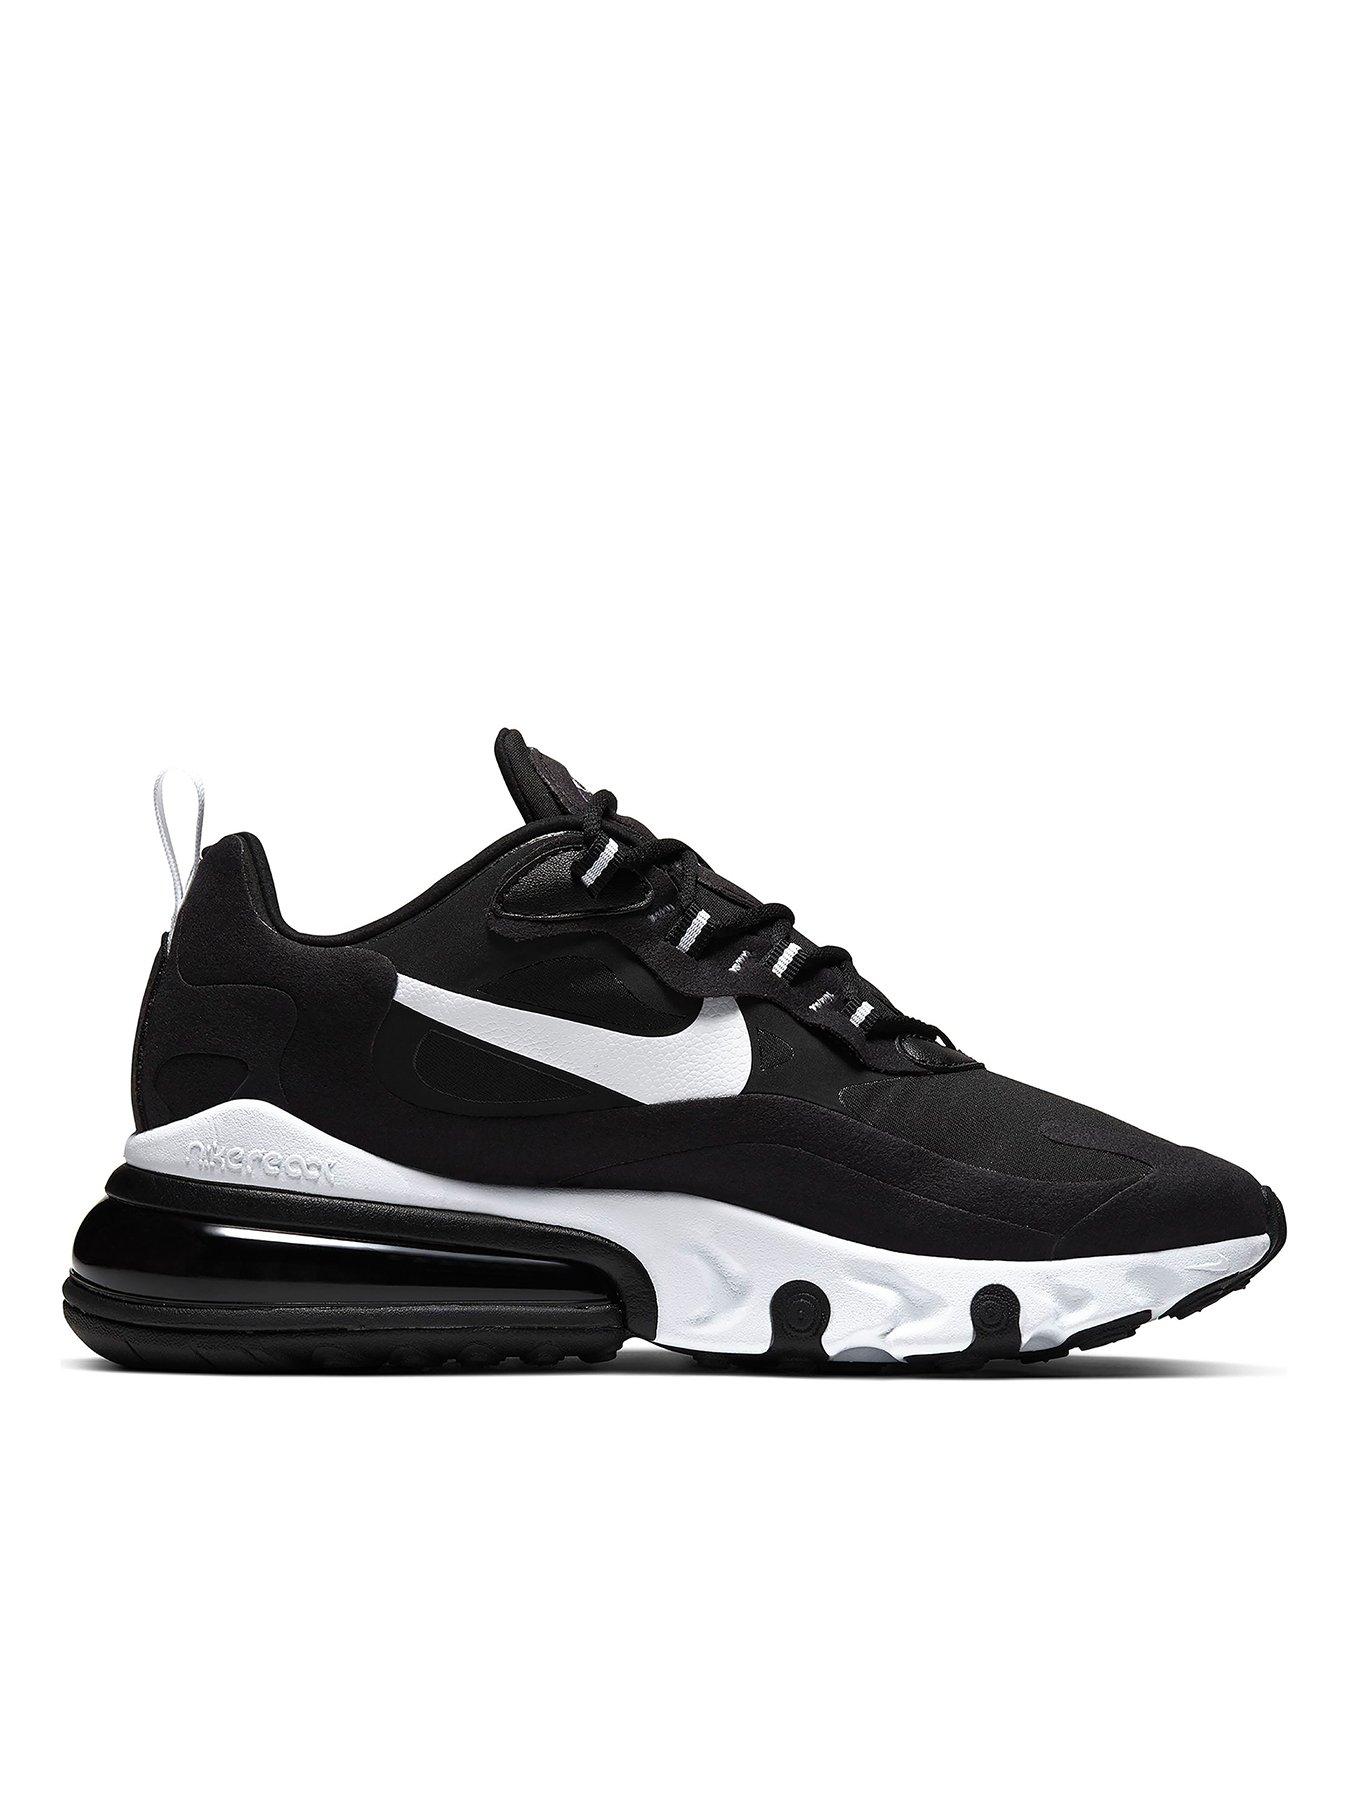 air max 270 black and white